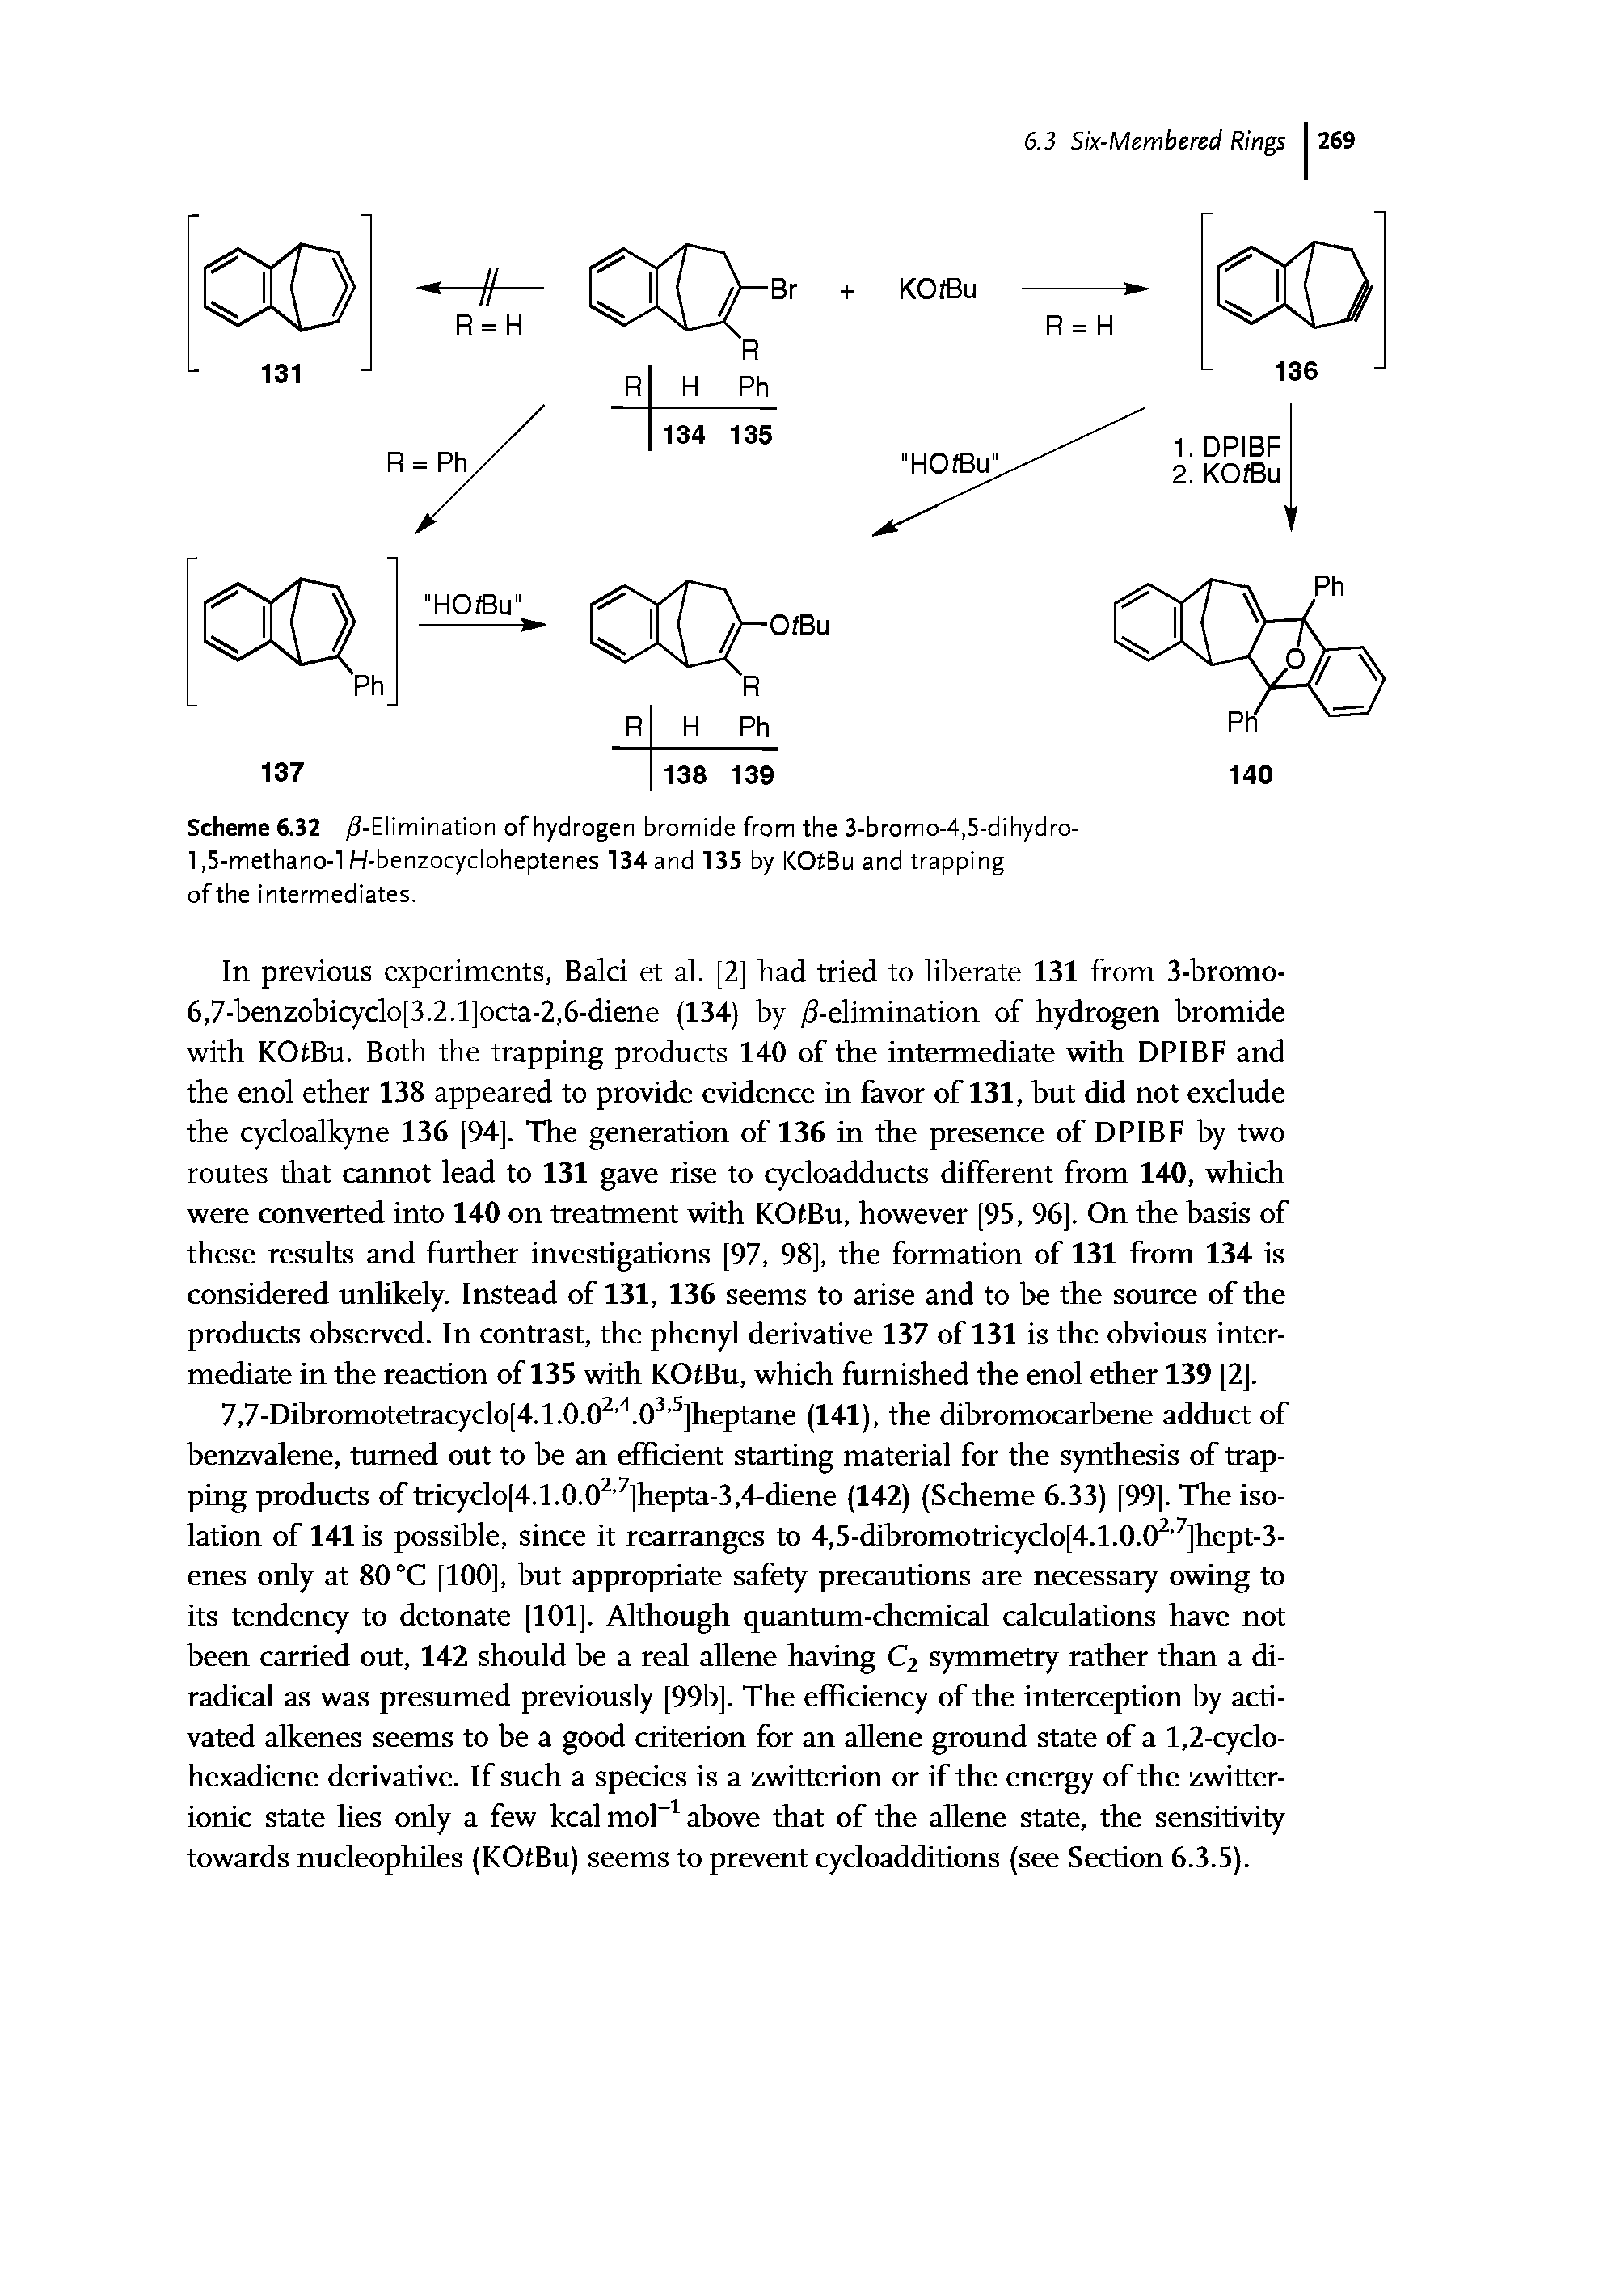 Scheme 6.32 -Elimination of hydrogen bromide from the 3-bromo-4,5-dihydro-1,5-methano-l H-benzocycloheptenes 134 and 135 by KOtBu and trapping of the intermediates.